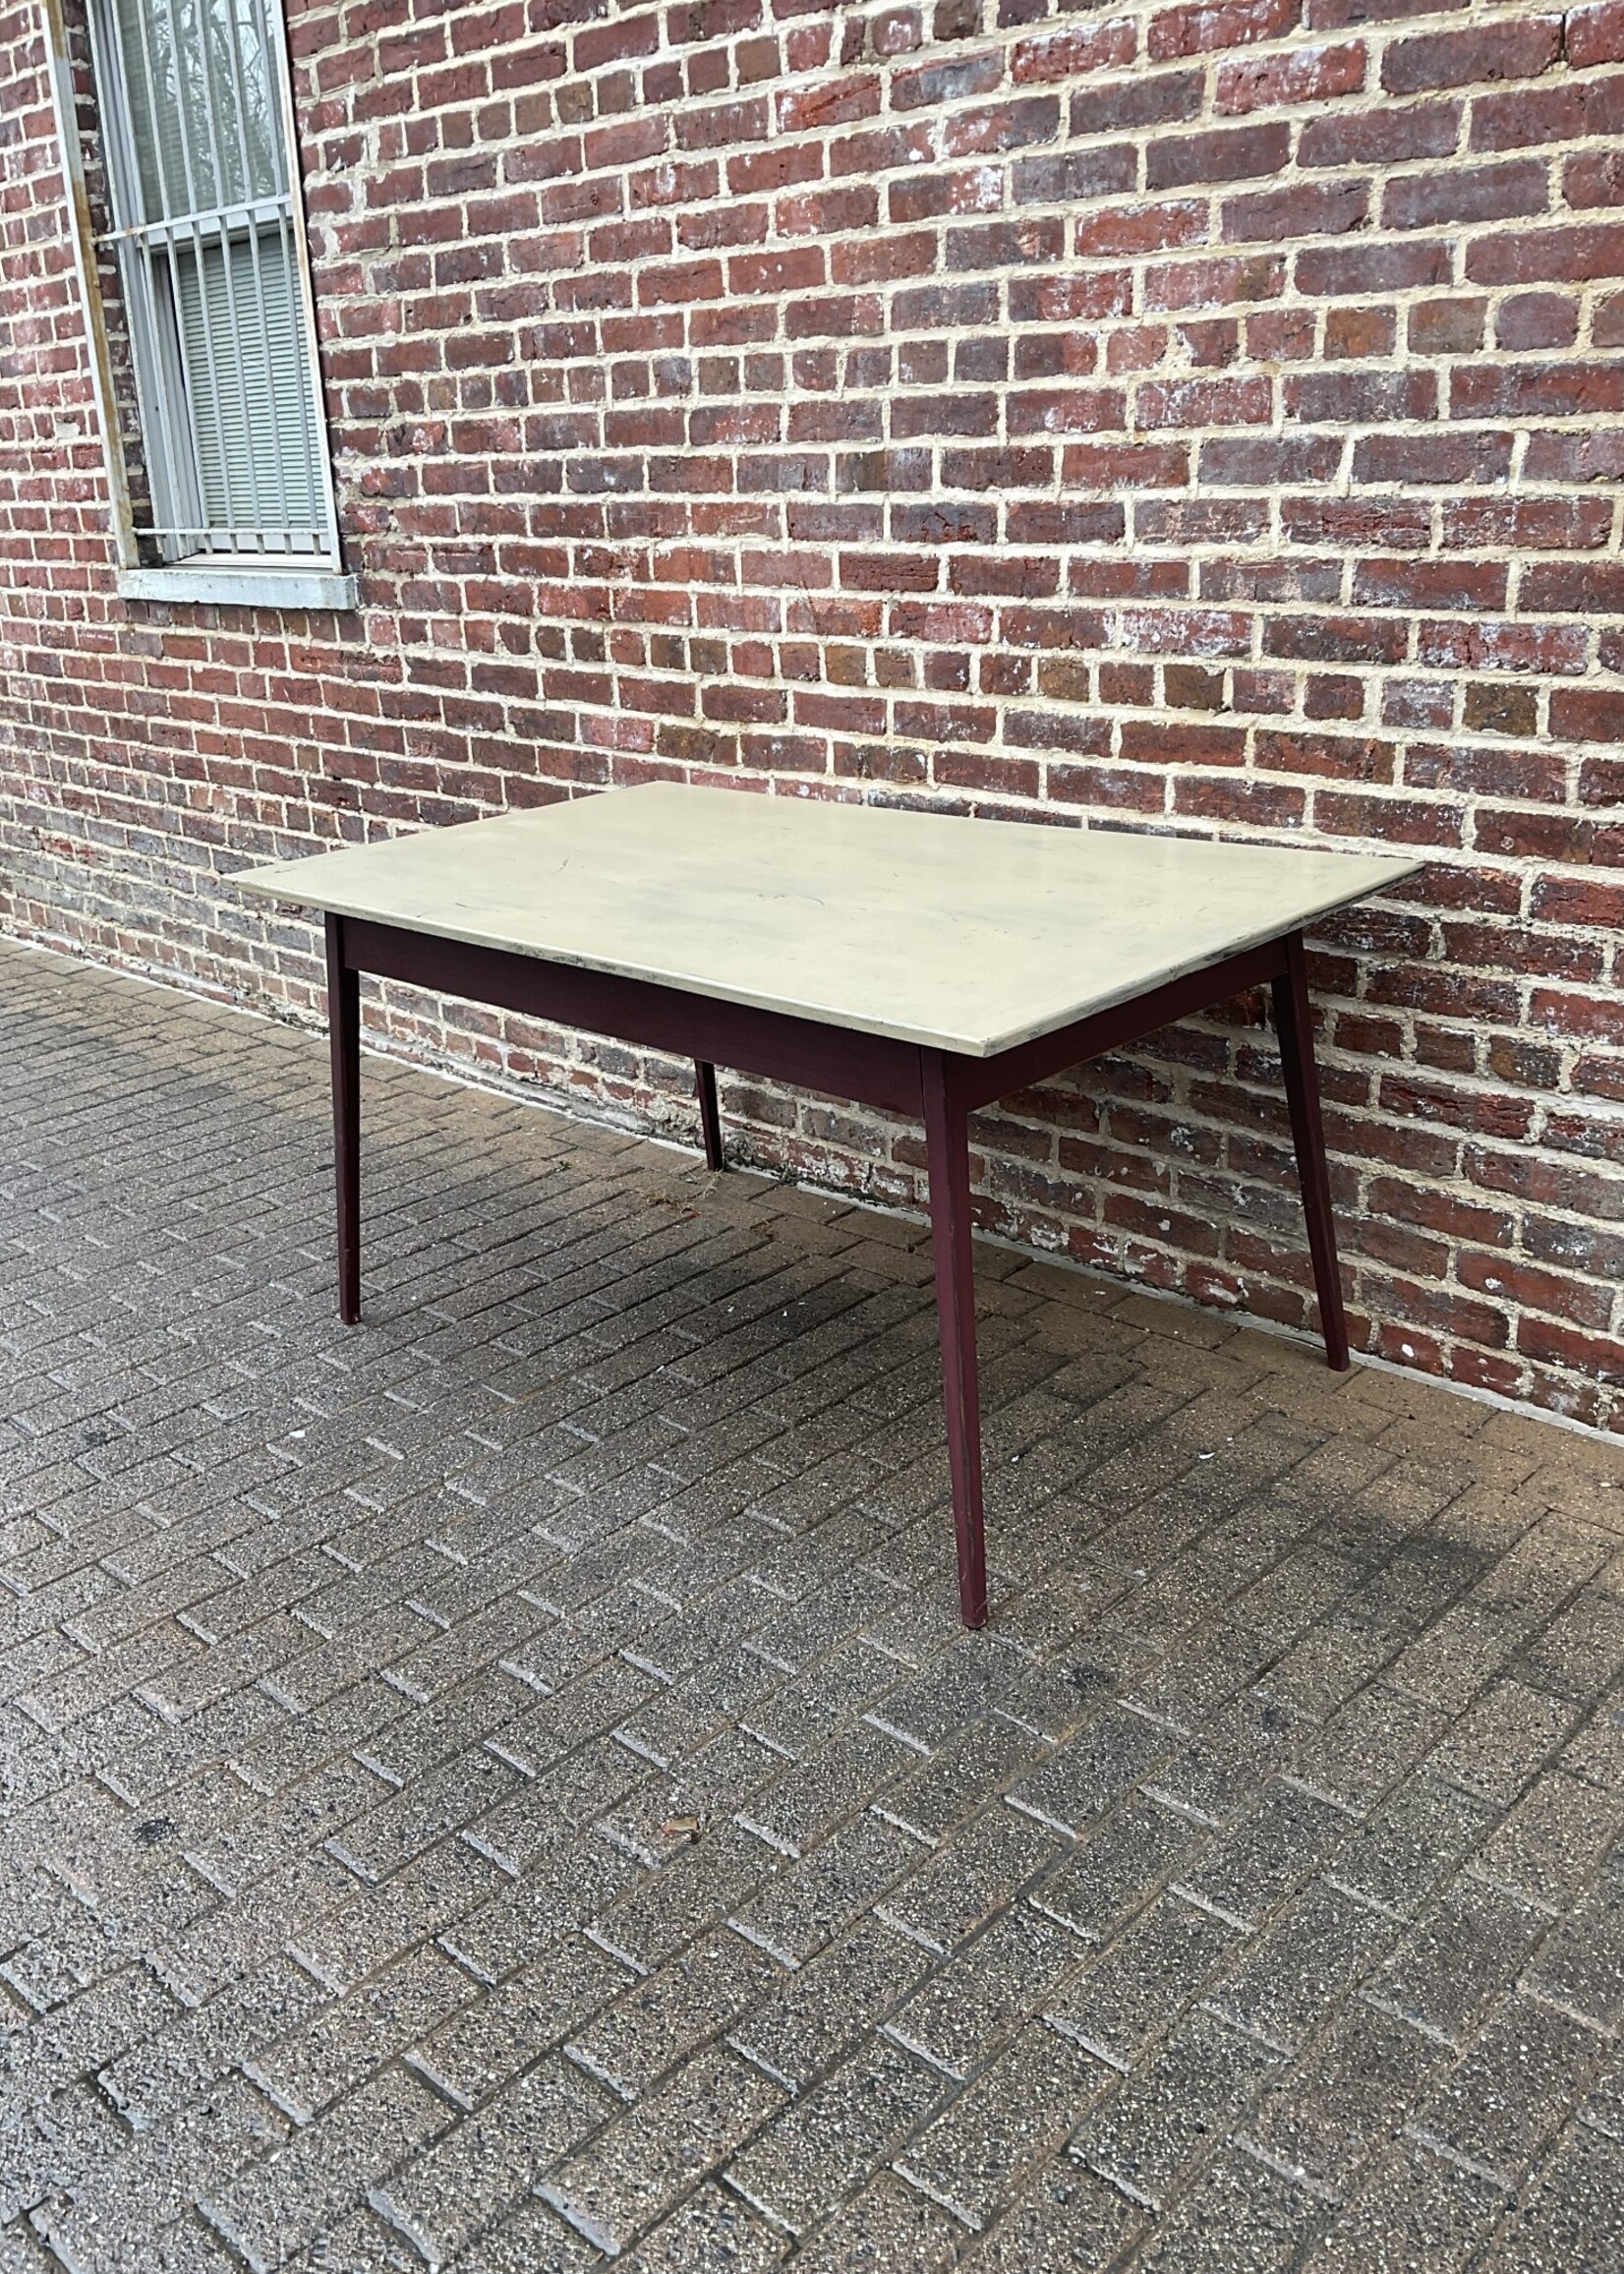 GOODWOOD Painted Shaker Style Table